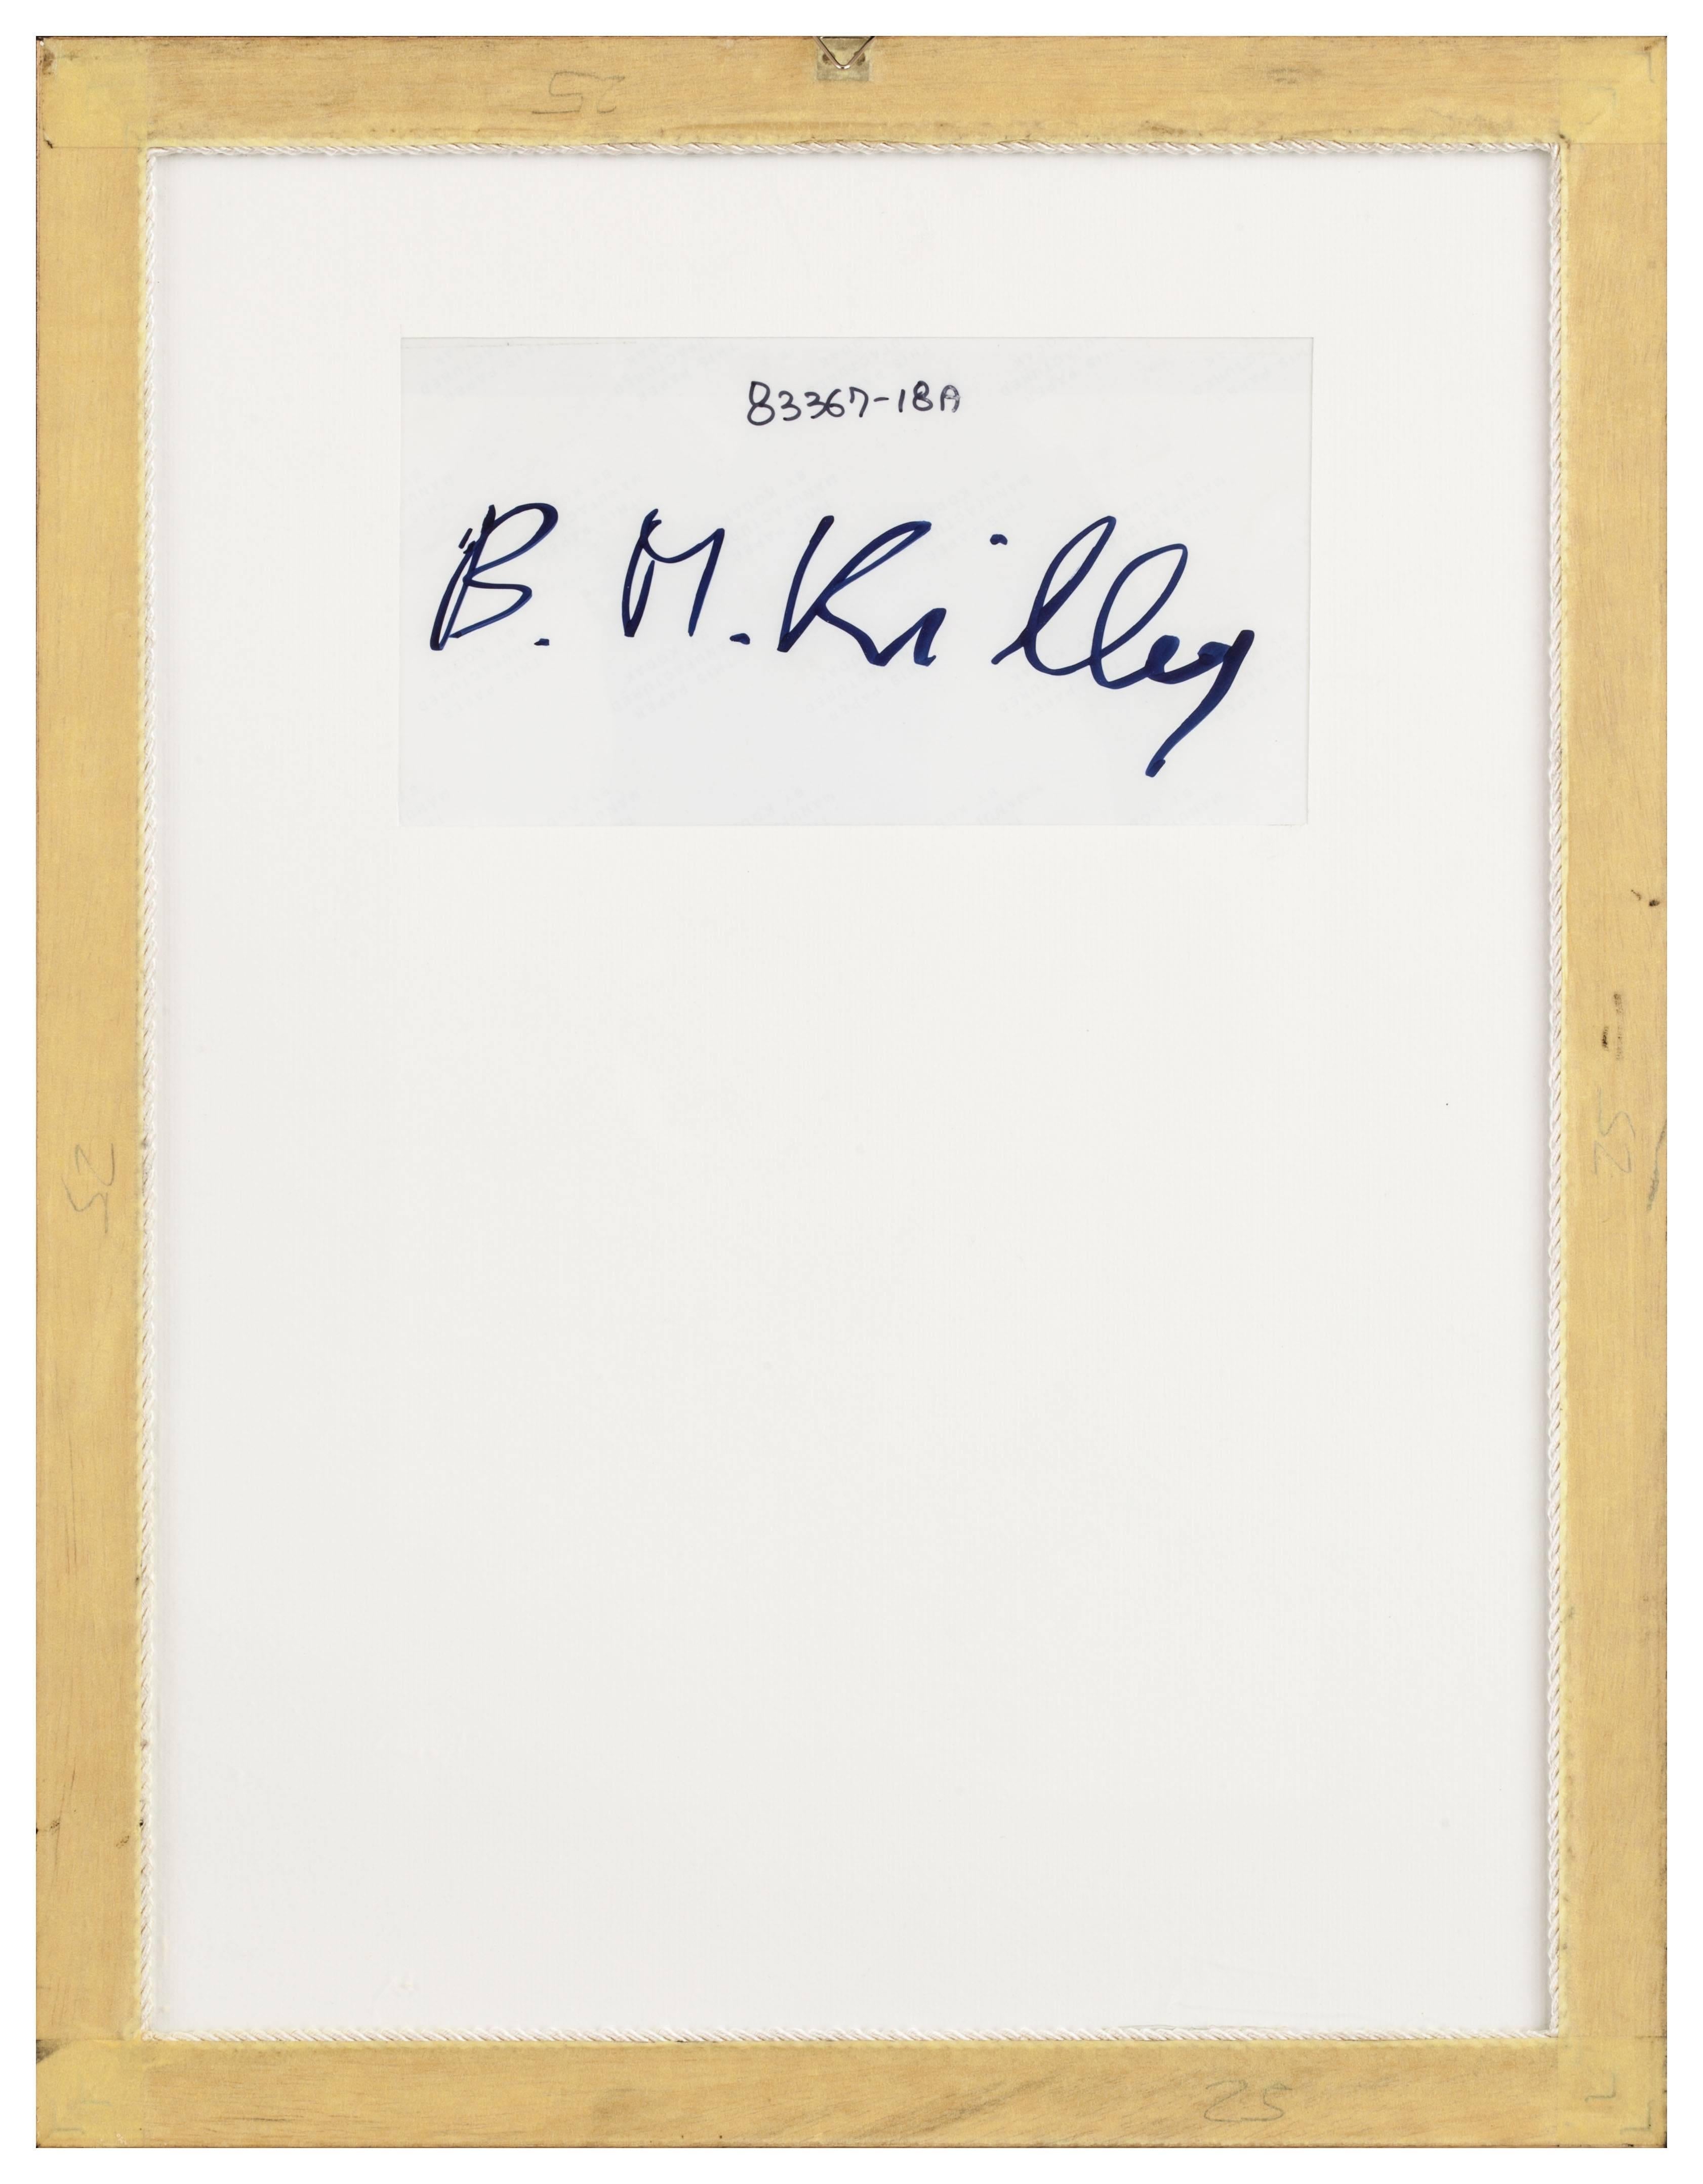 Dimensions:
33,7 x 23,1
48,2 x 37,4 with frames
signed, annotation of the proof number, edition of 18 (verso)
Fashion Photography

McKinley was born in New Zealand and lived in Australia, where he studied veterinary surgery before taking up